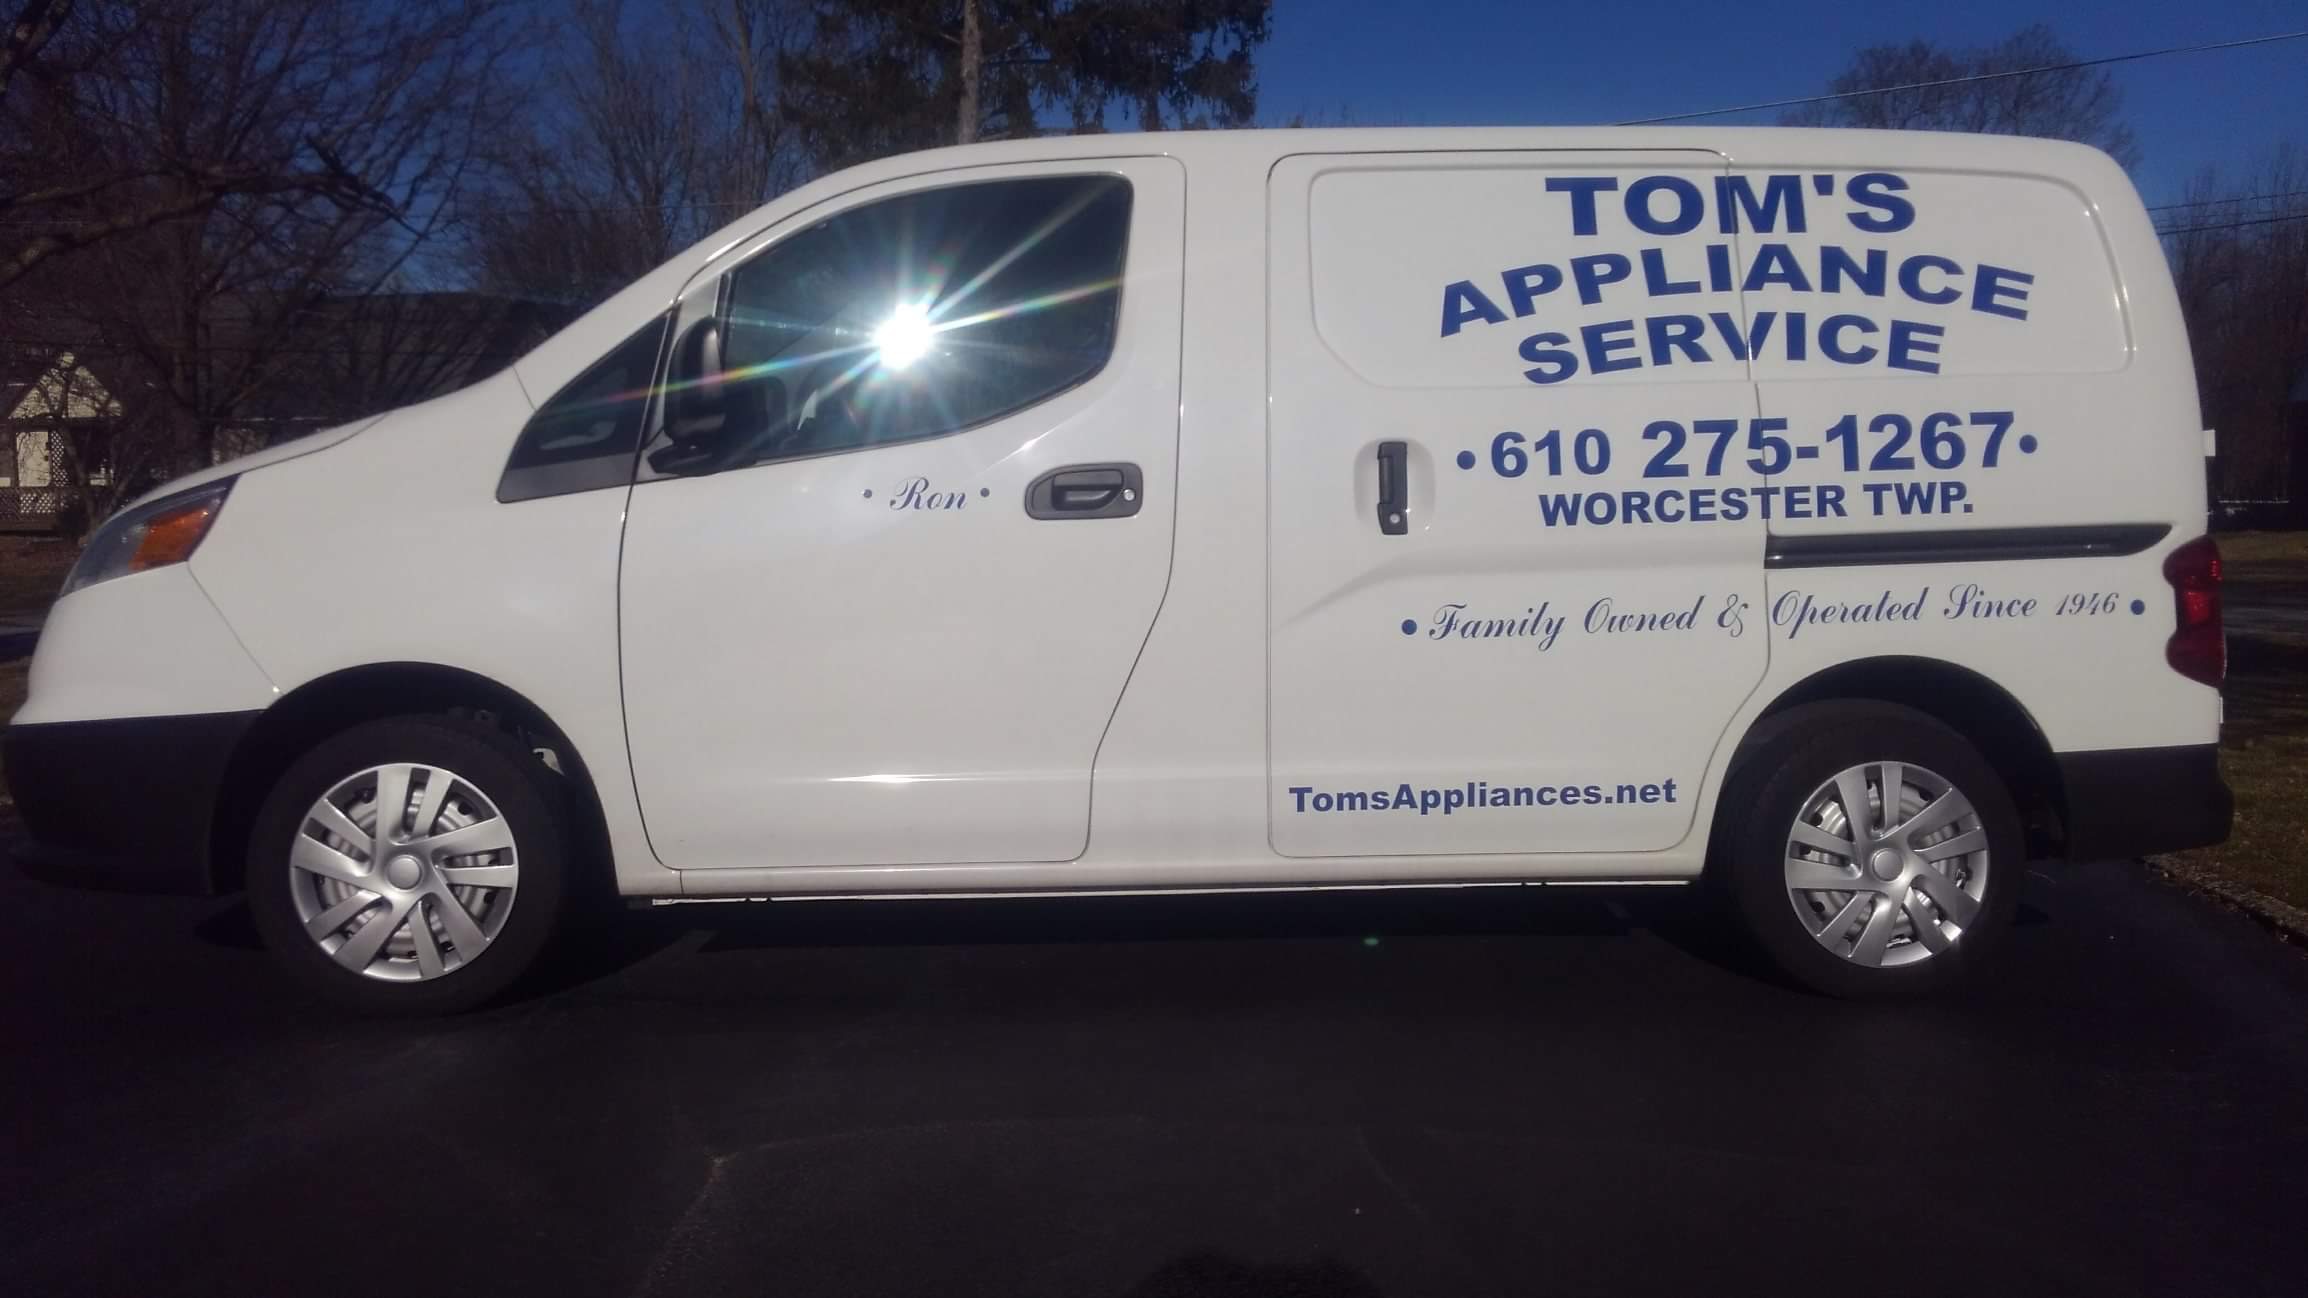 Tom's Appliances specializes in washer, dryer and stove / range repairs.